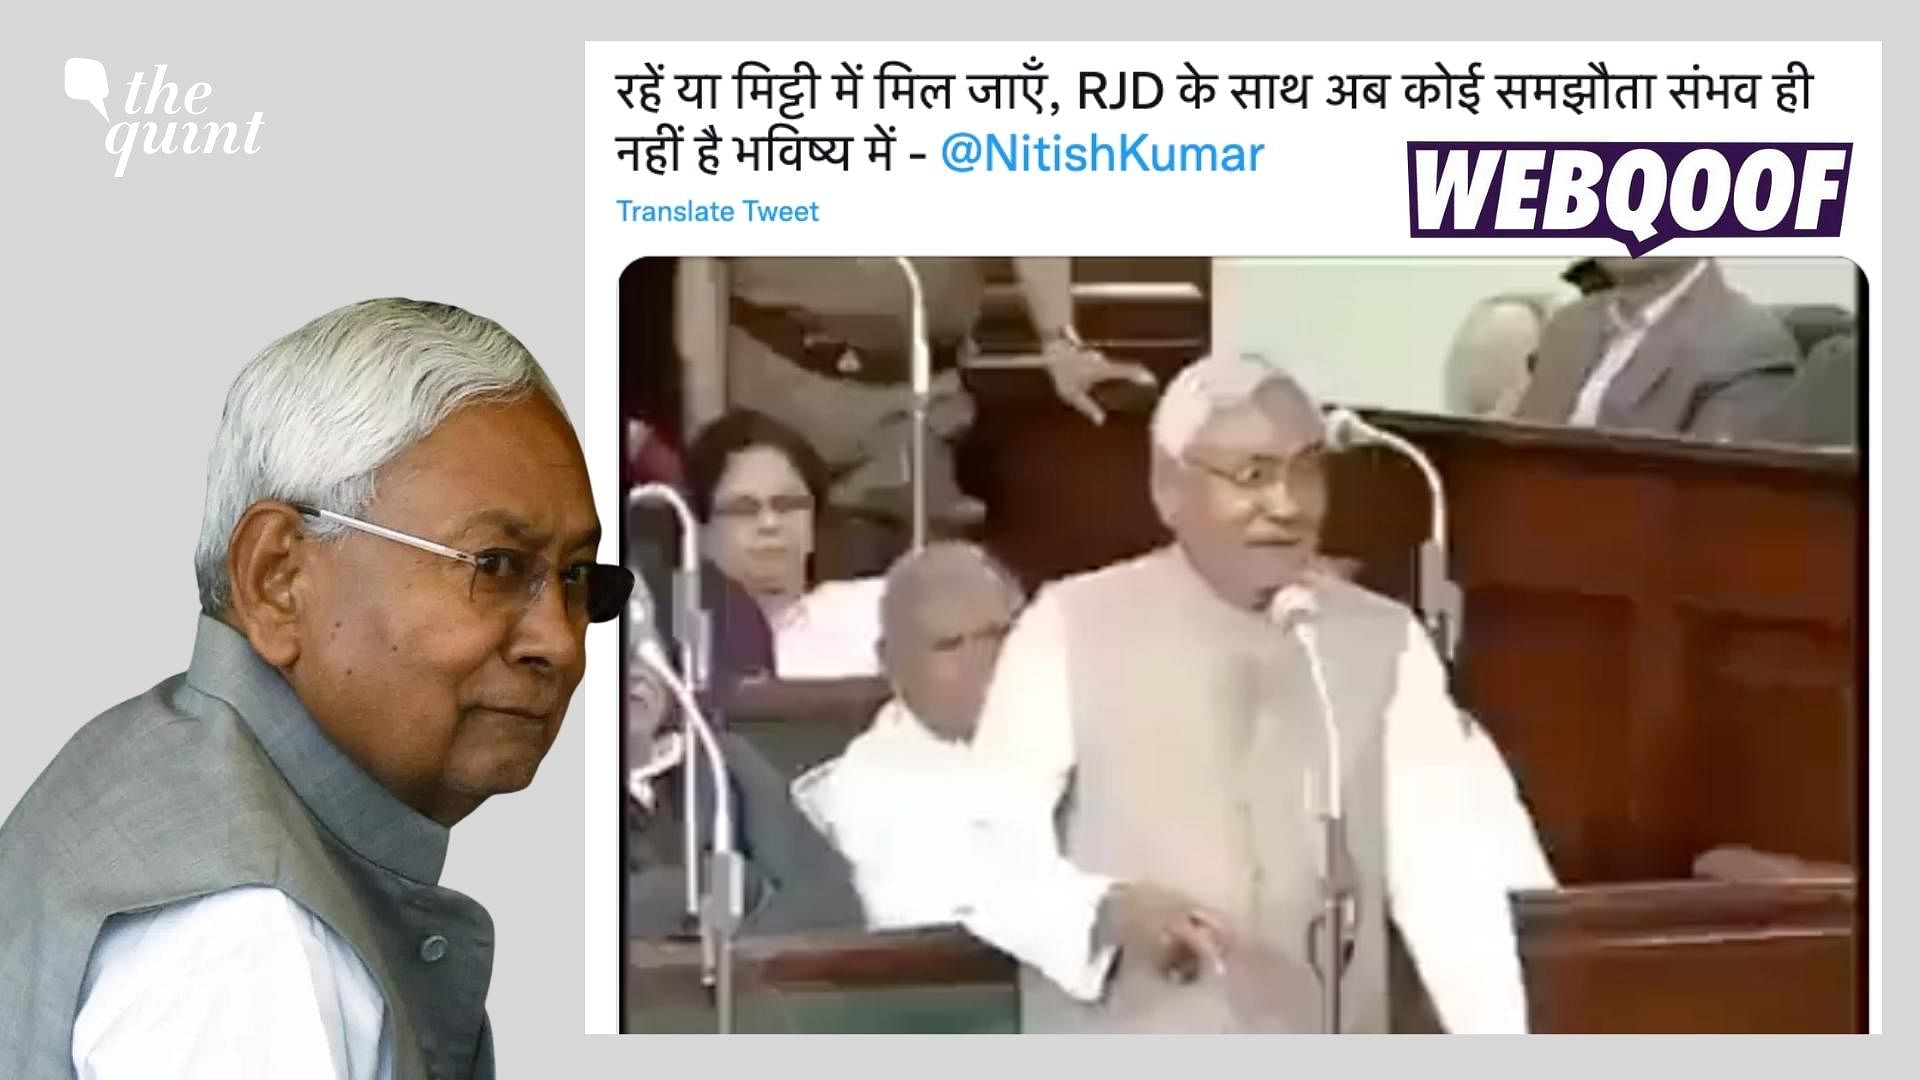 <div class="paragraphs"><p>The claims state that Bihar CM Nitish Kumar had said that his party would never enter into an agreement with the RJD.&nbsp;</p></div>